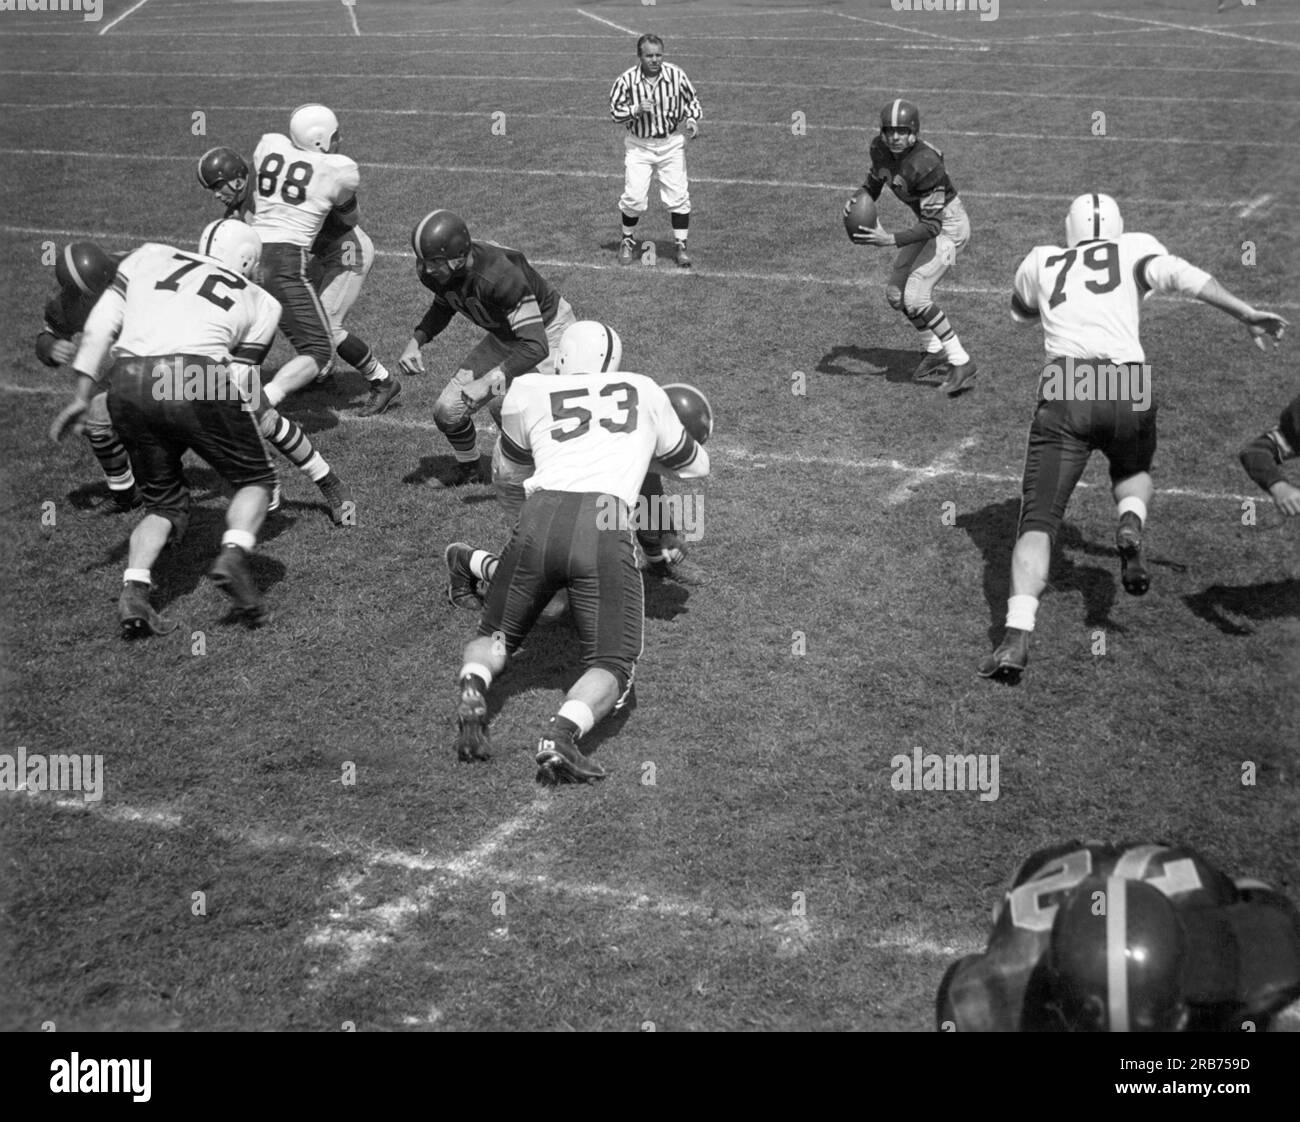 United States:  c. 1950 The quarterback faces a rush from the other team as he drops back to pass the football. Stock Photo